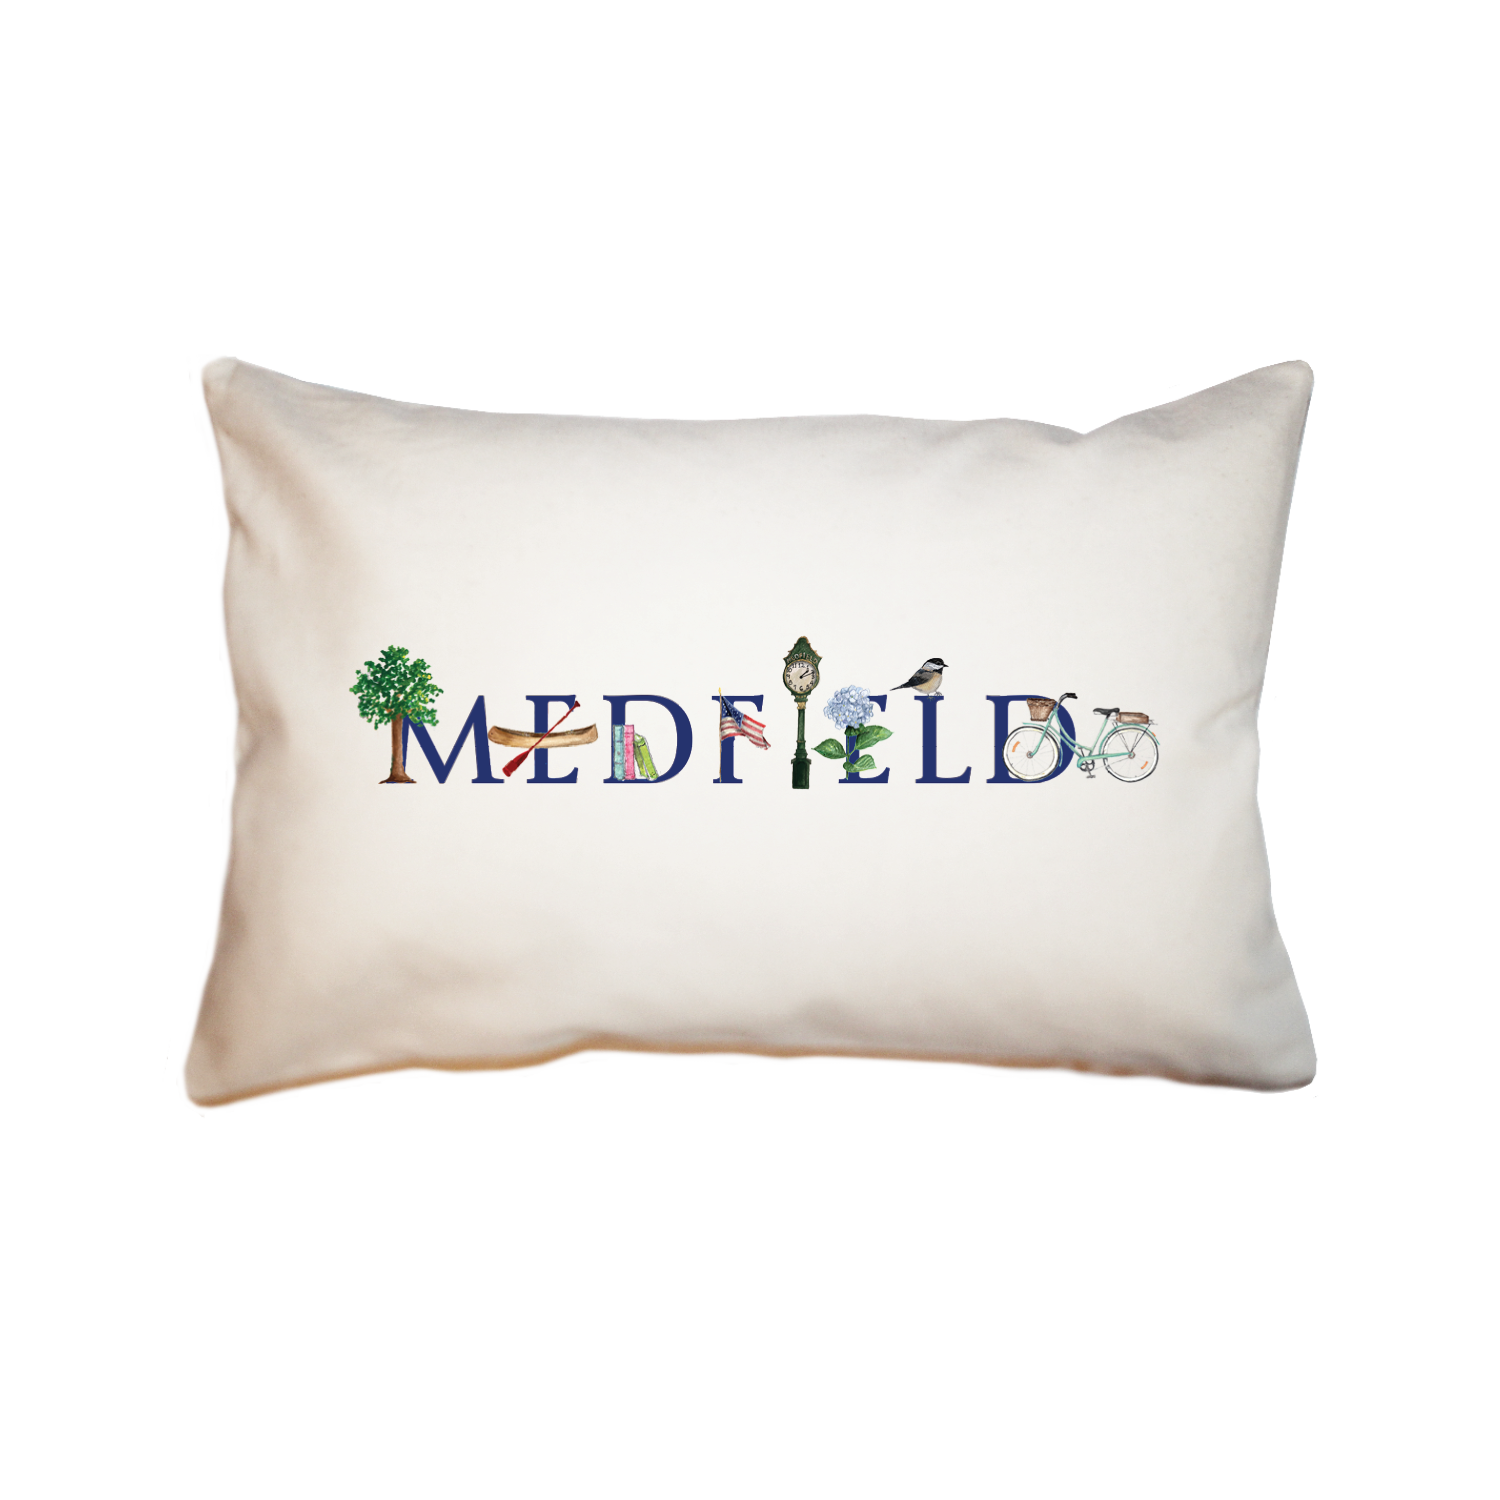 medfield large rectangle pillow